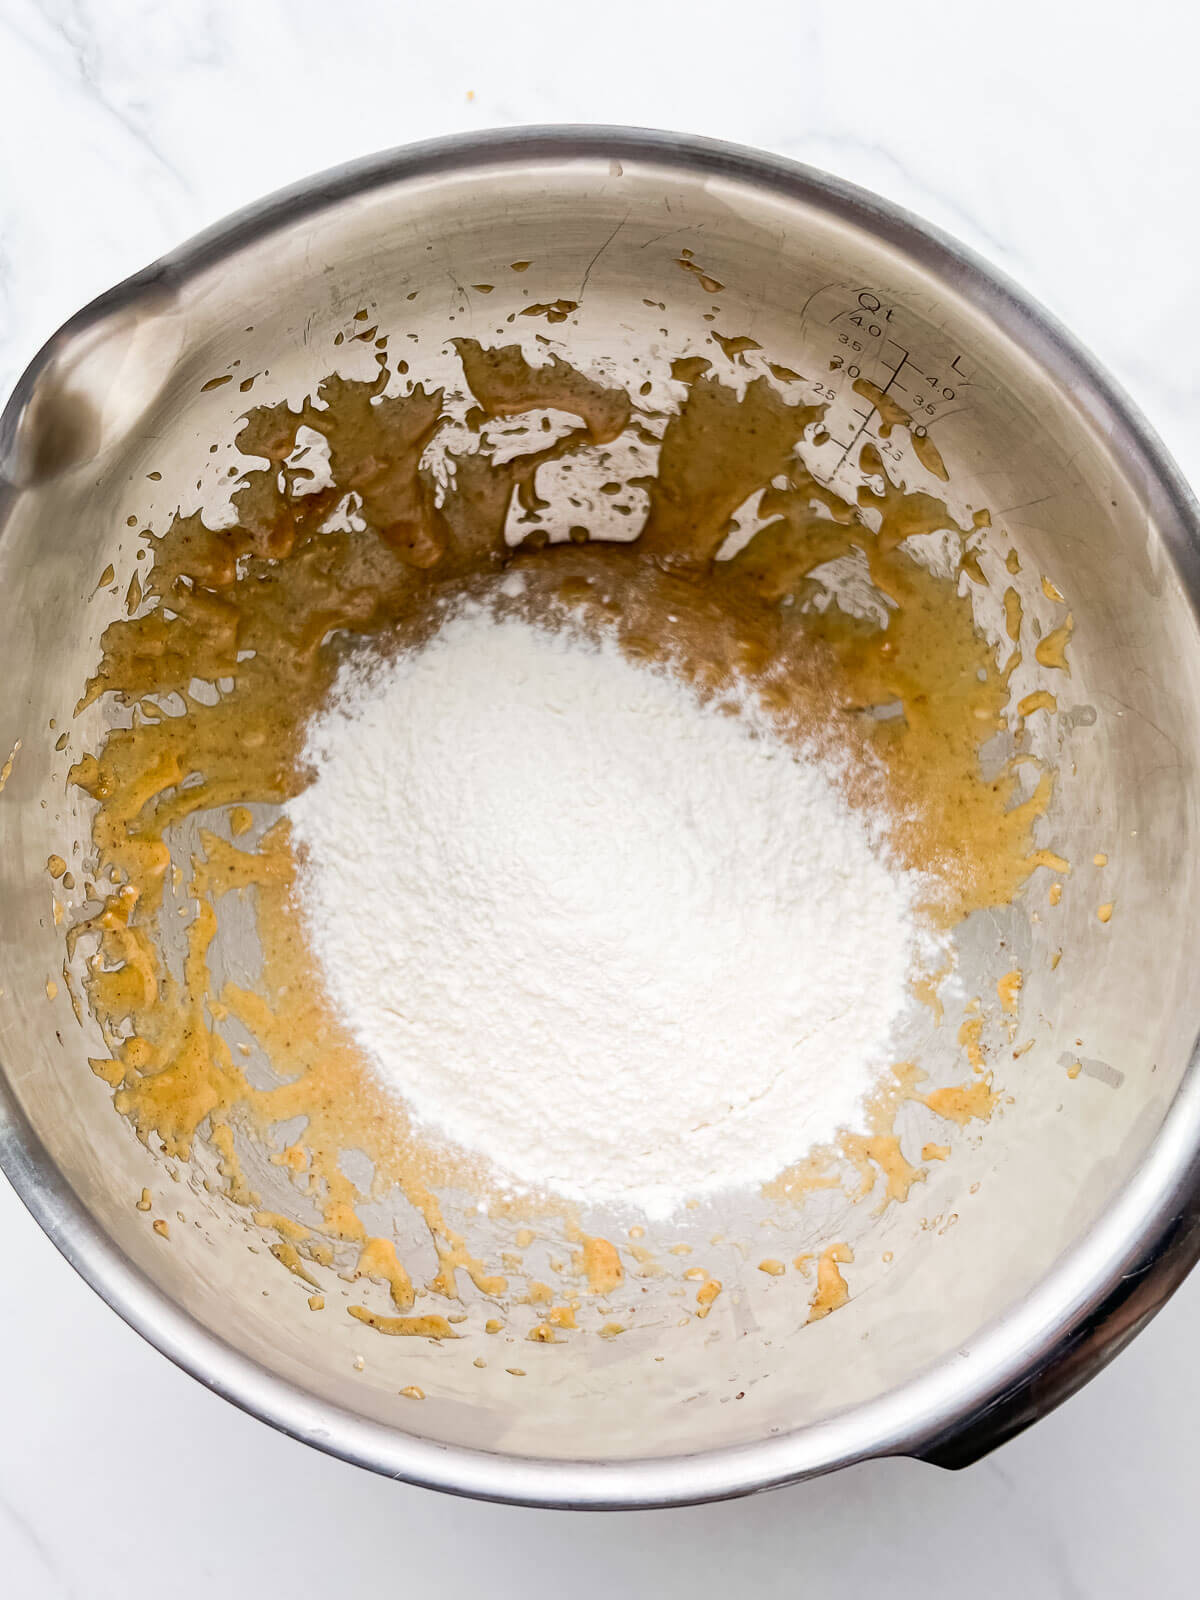 Dry ingredients sprinkled over creamed butter, sugar, and eggs in a stainless steel bowl to make blondies or cookie bars.